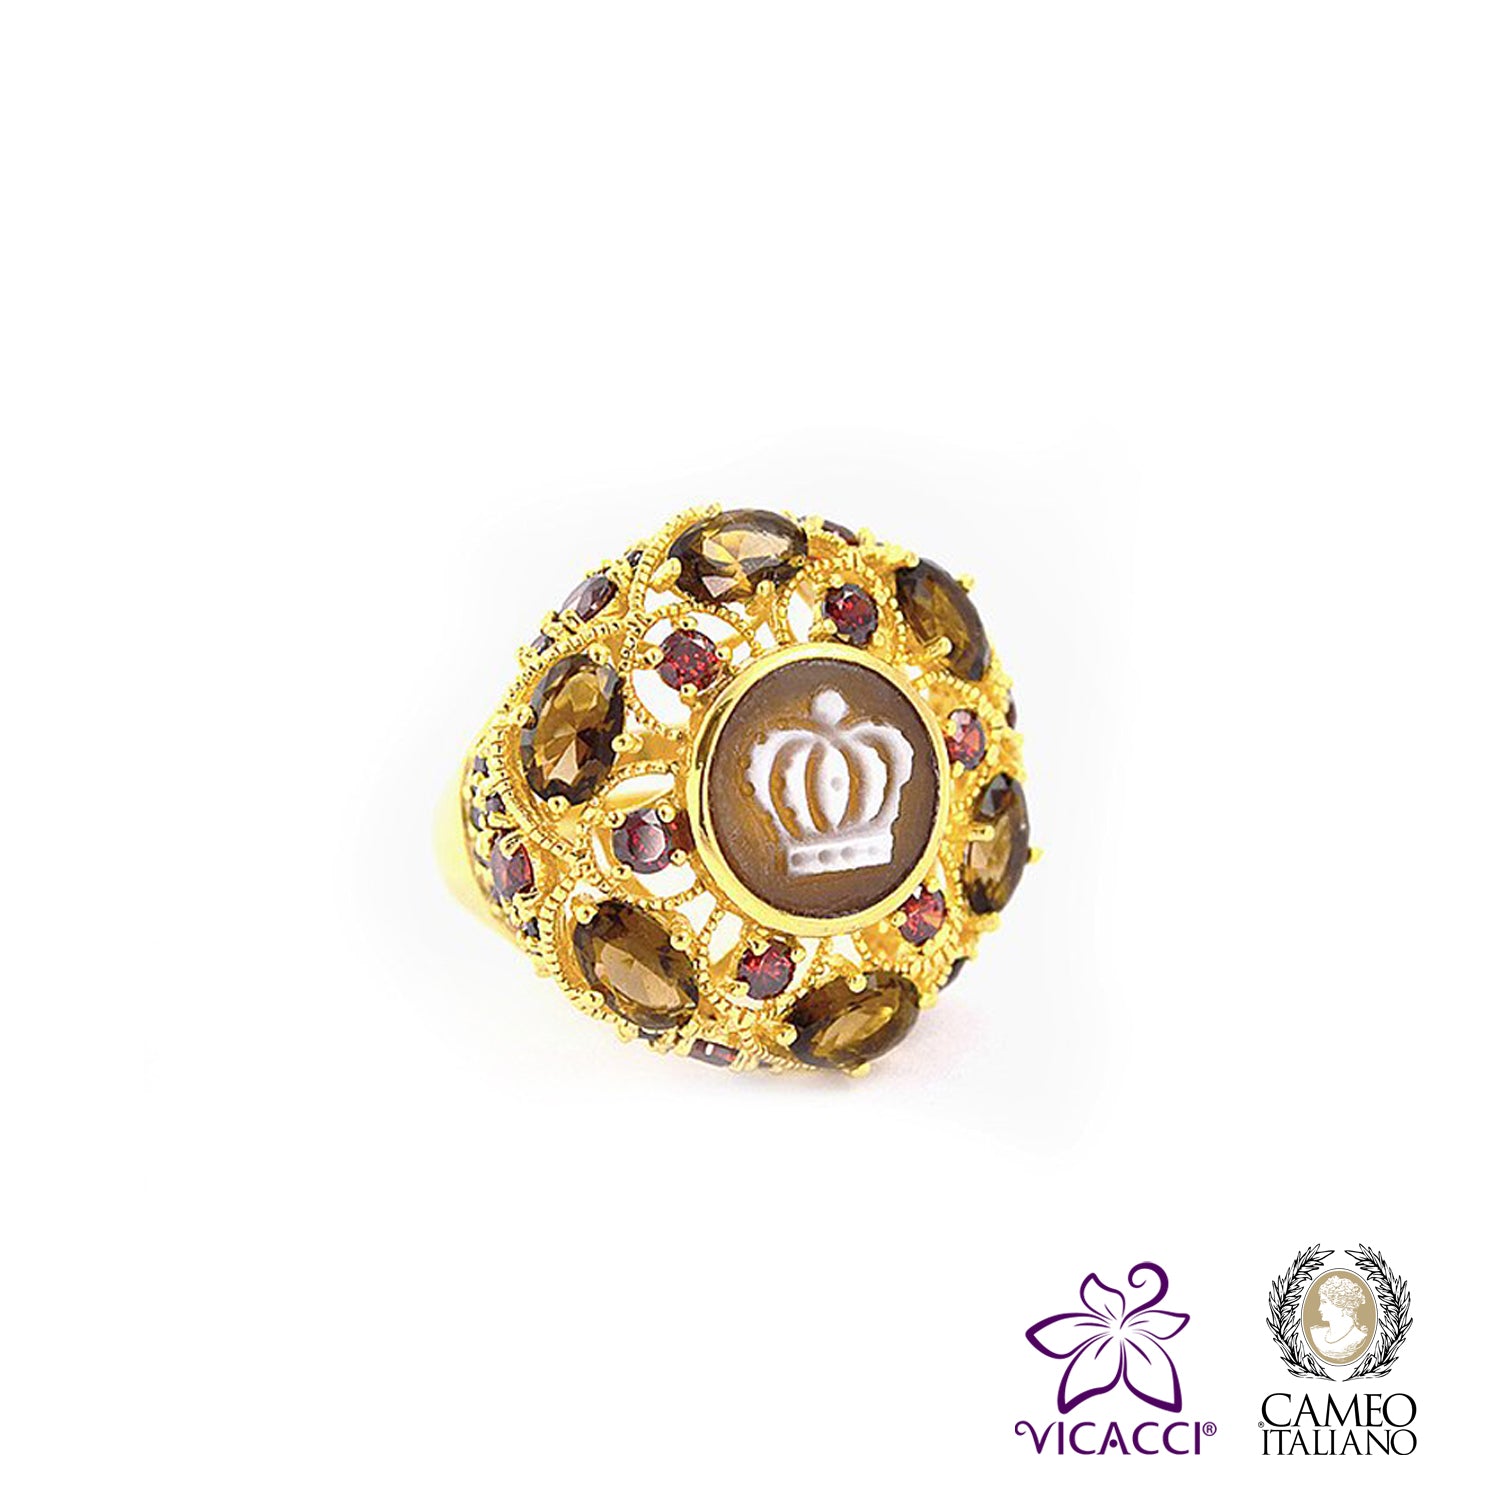 Cameo Italiano, A58 Ring , Gold Plated Sterling Silver